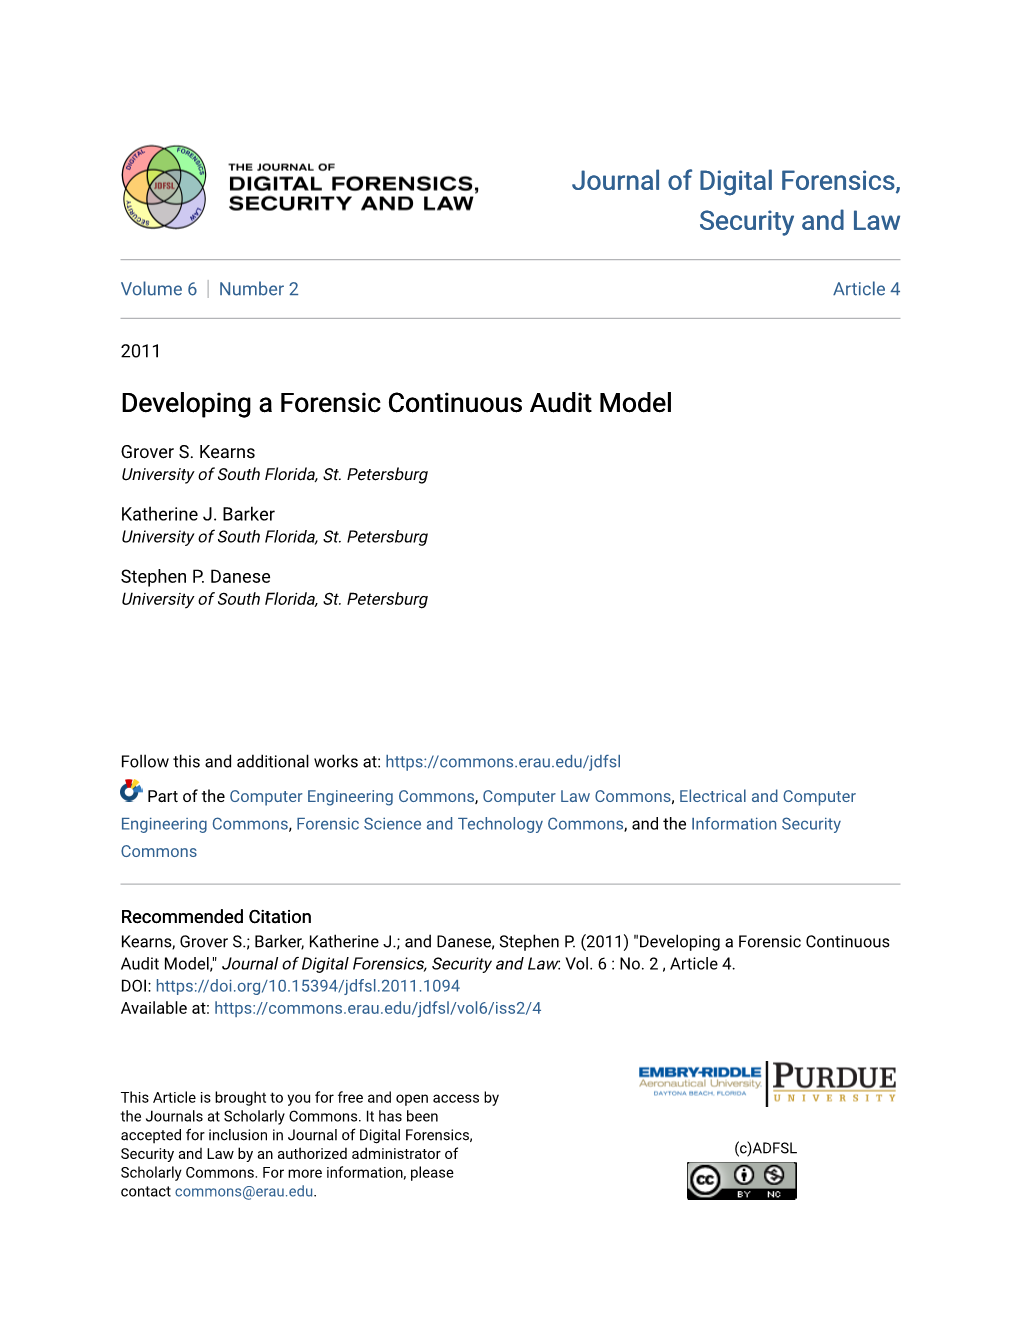 Developing a Forensic Continuous Audit Model